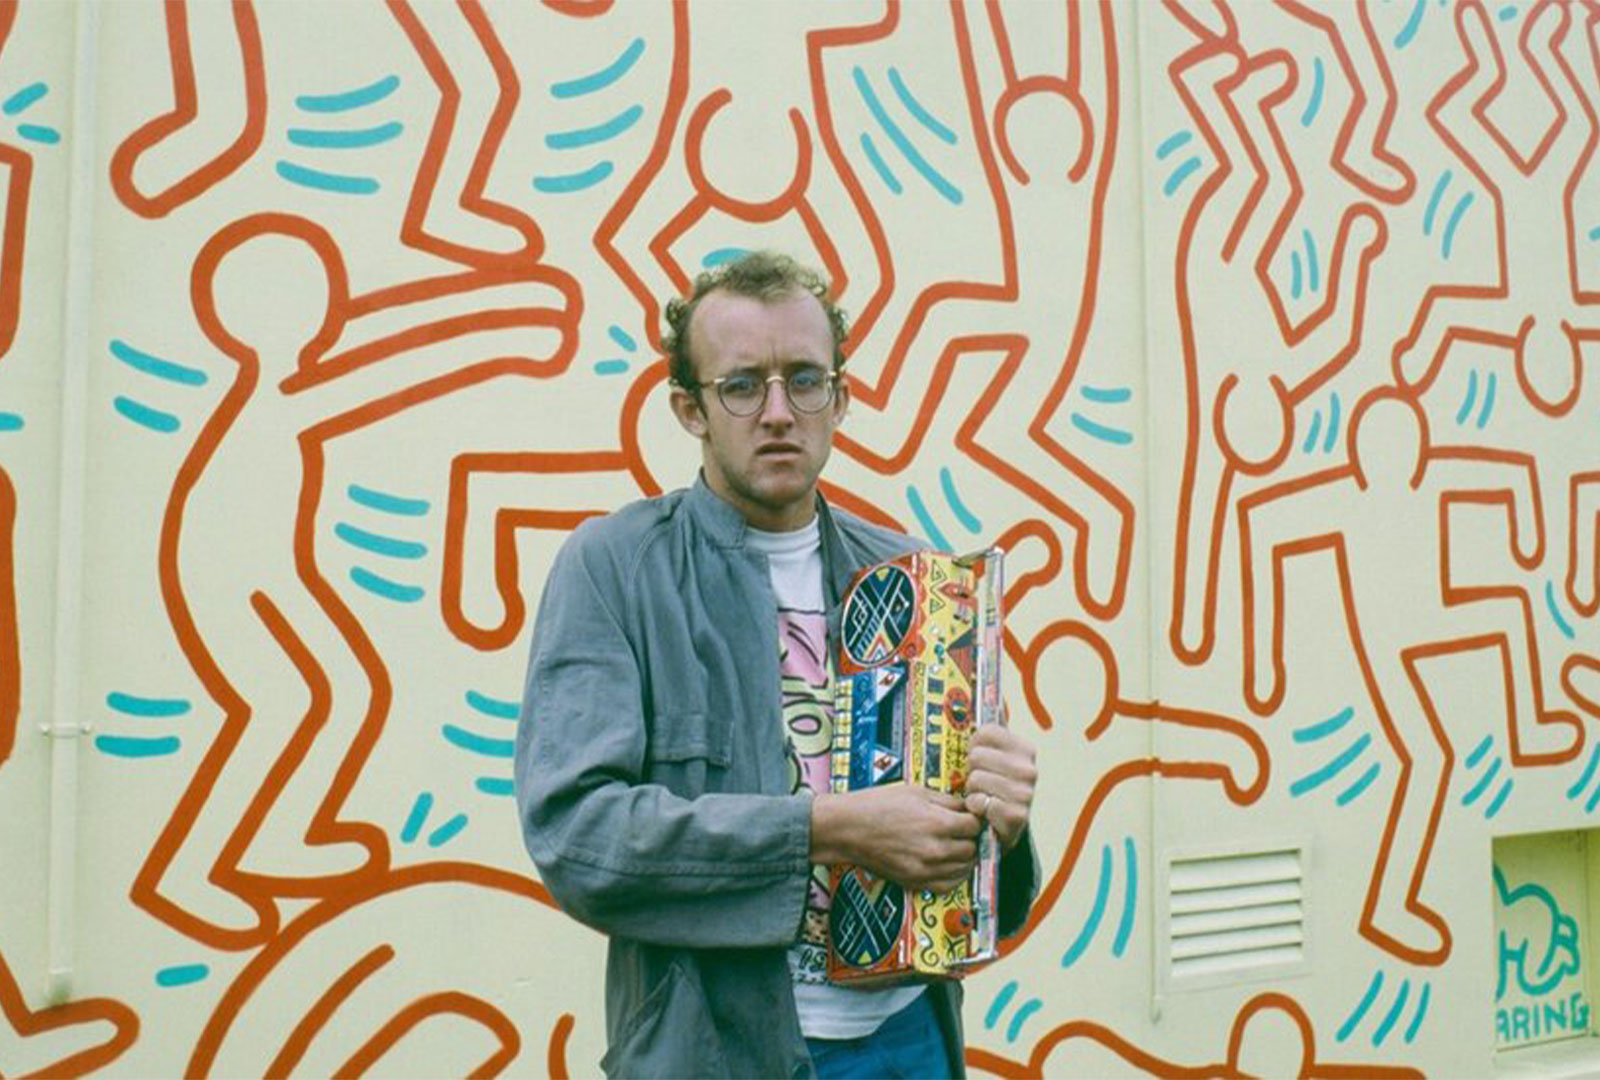 Keith Haring - Overview